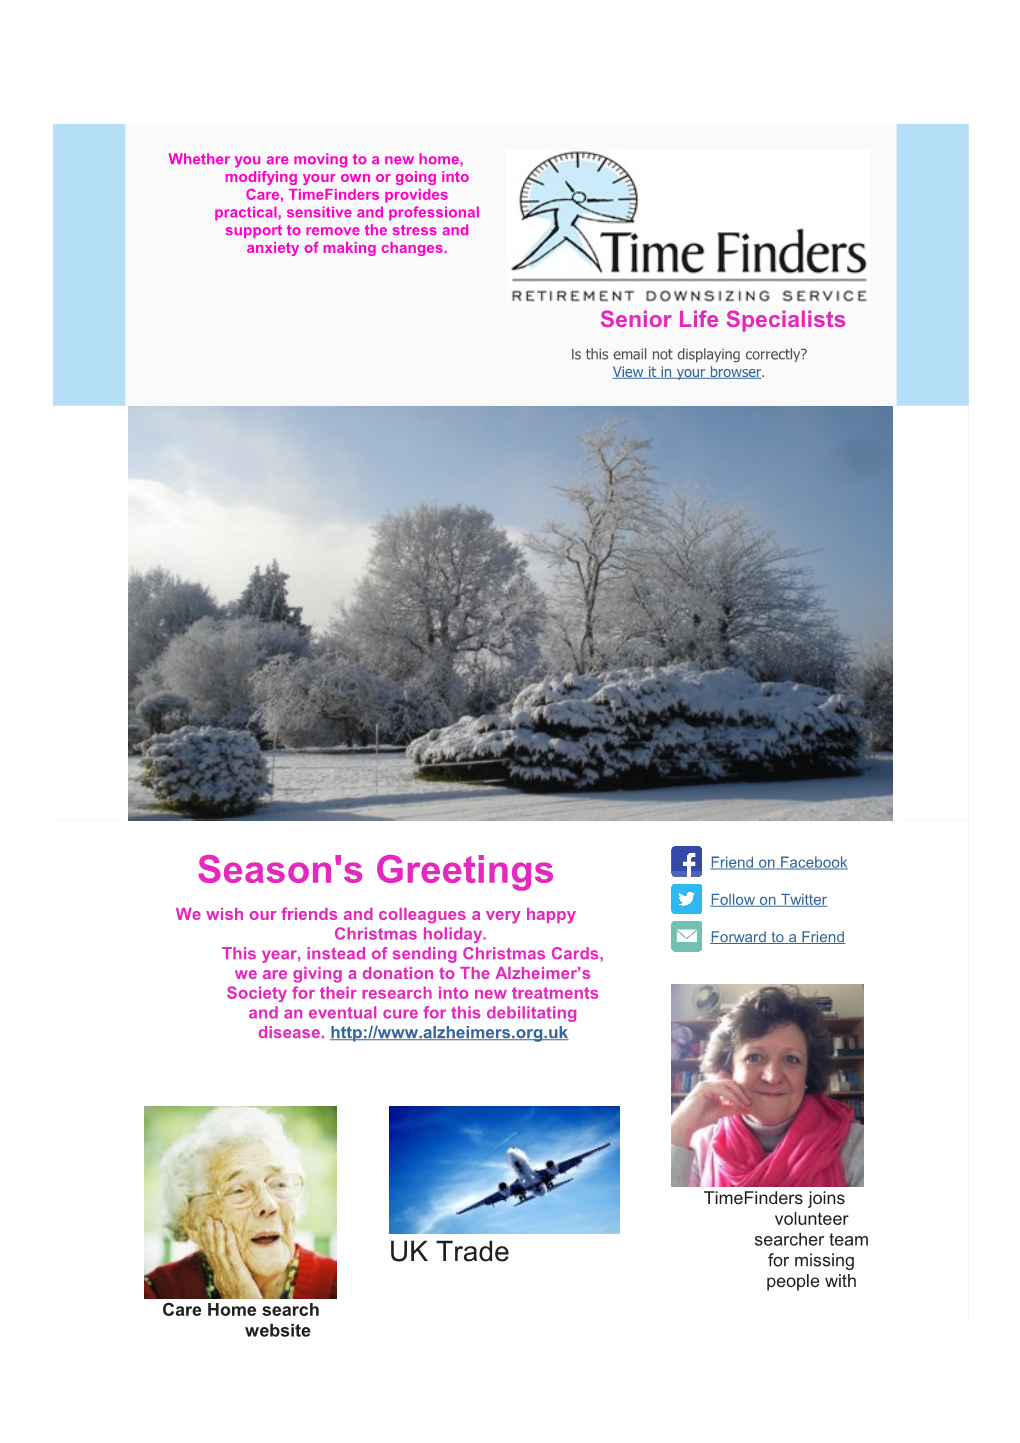 Whether You Are Moving to a New Home, Modifying Your Own Or Going Into Care, Timefinders